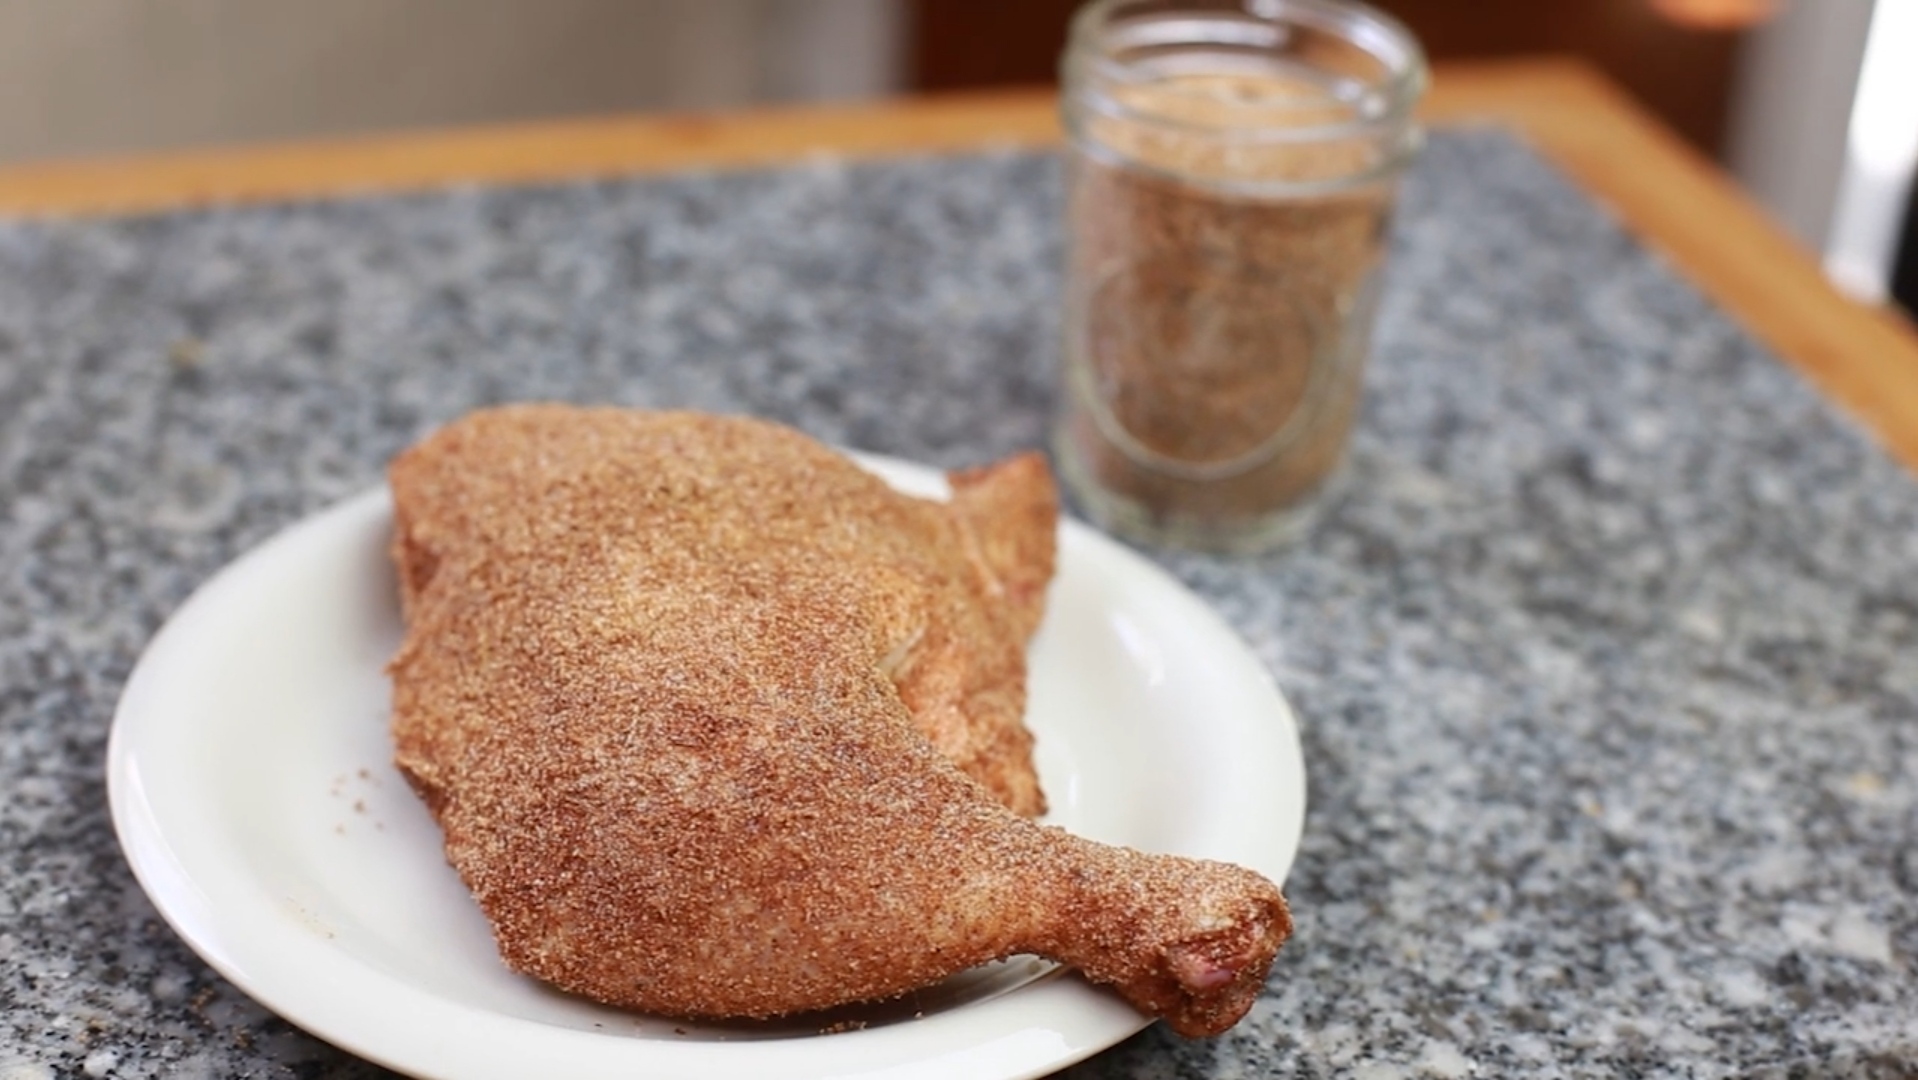 The Best Dry Rub for Chicken